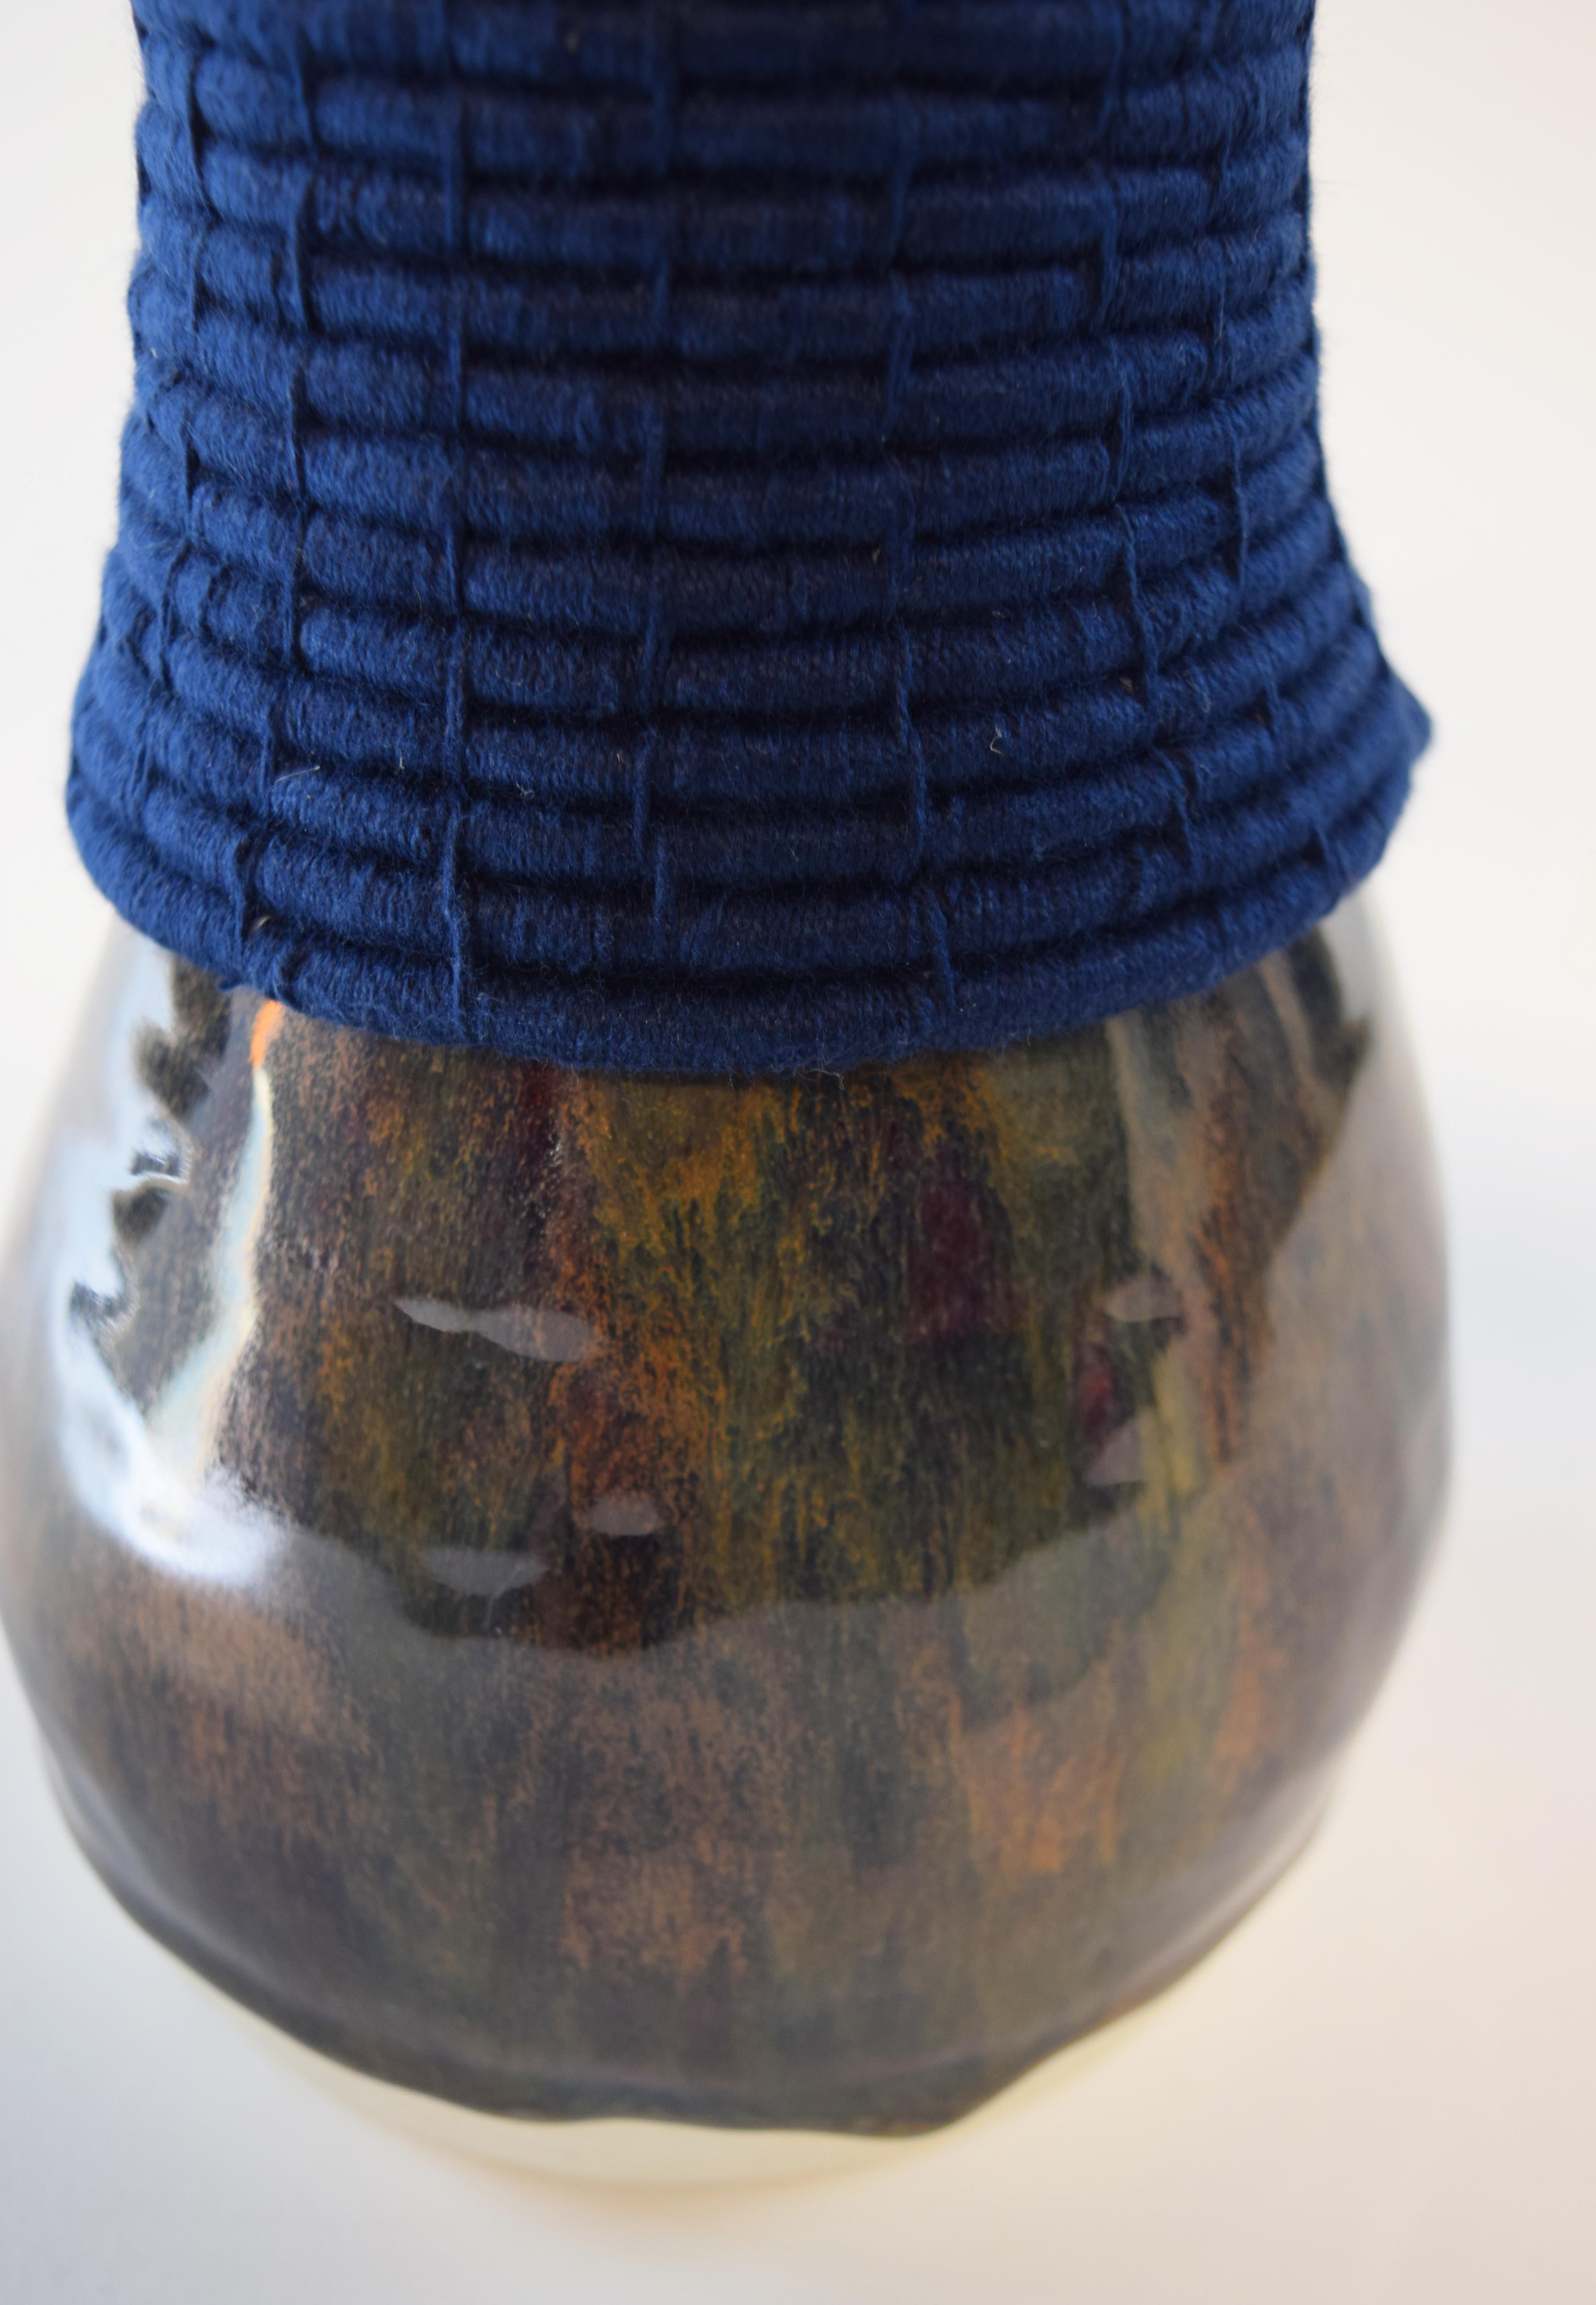 American One of a Kind Ceramic Vase #768, Multi-Colored Glaze & Woven Navy Cotton Detail